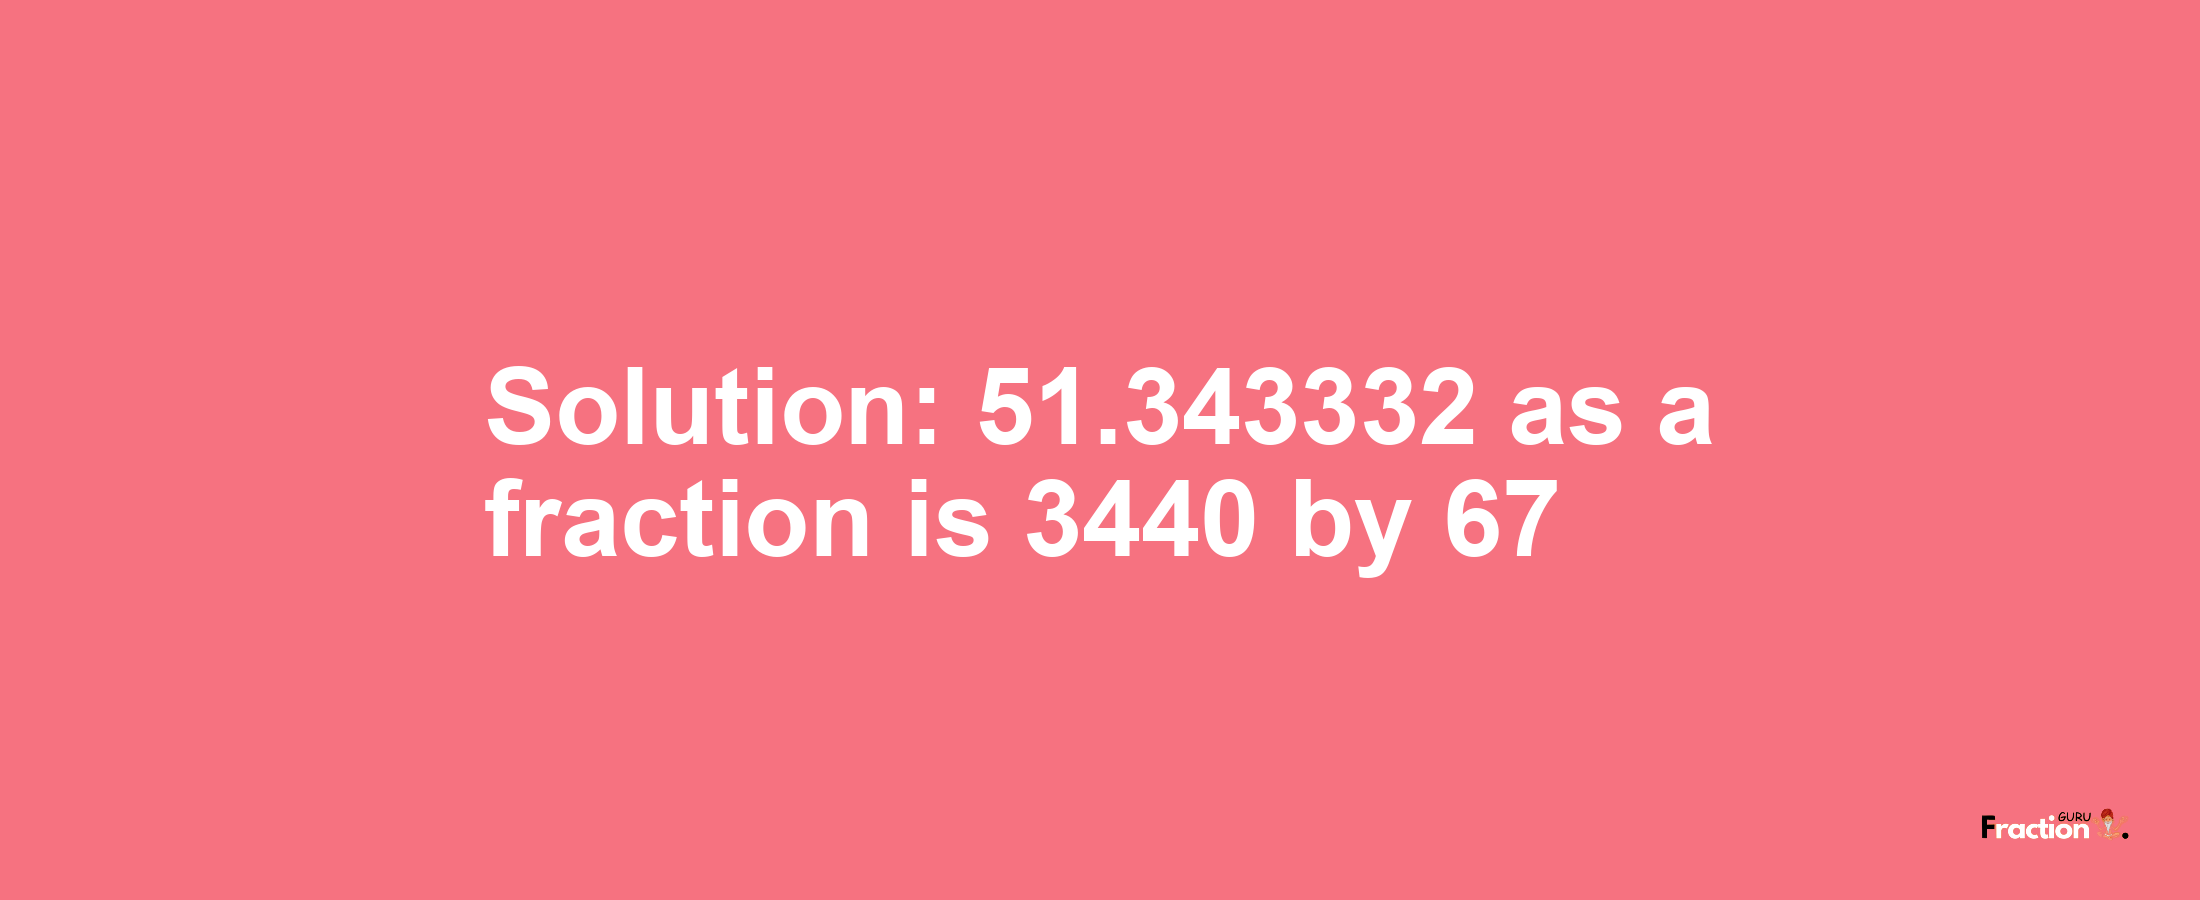 Solution:51.343332 as a fraction is 3440/67